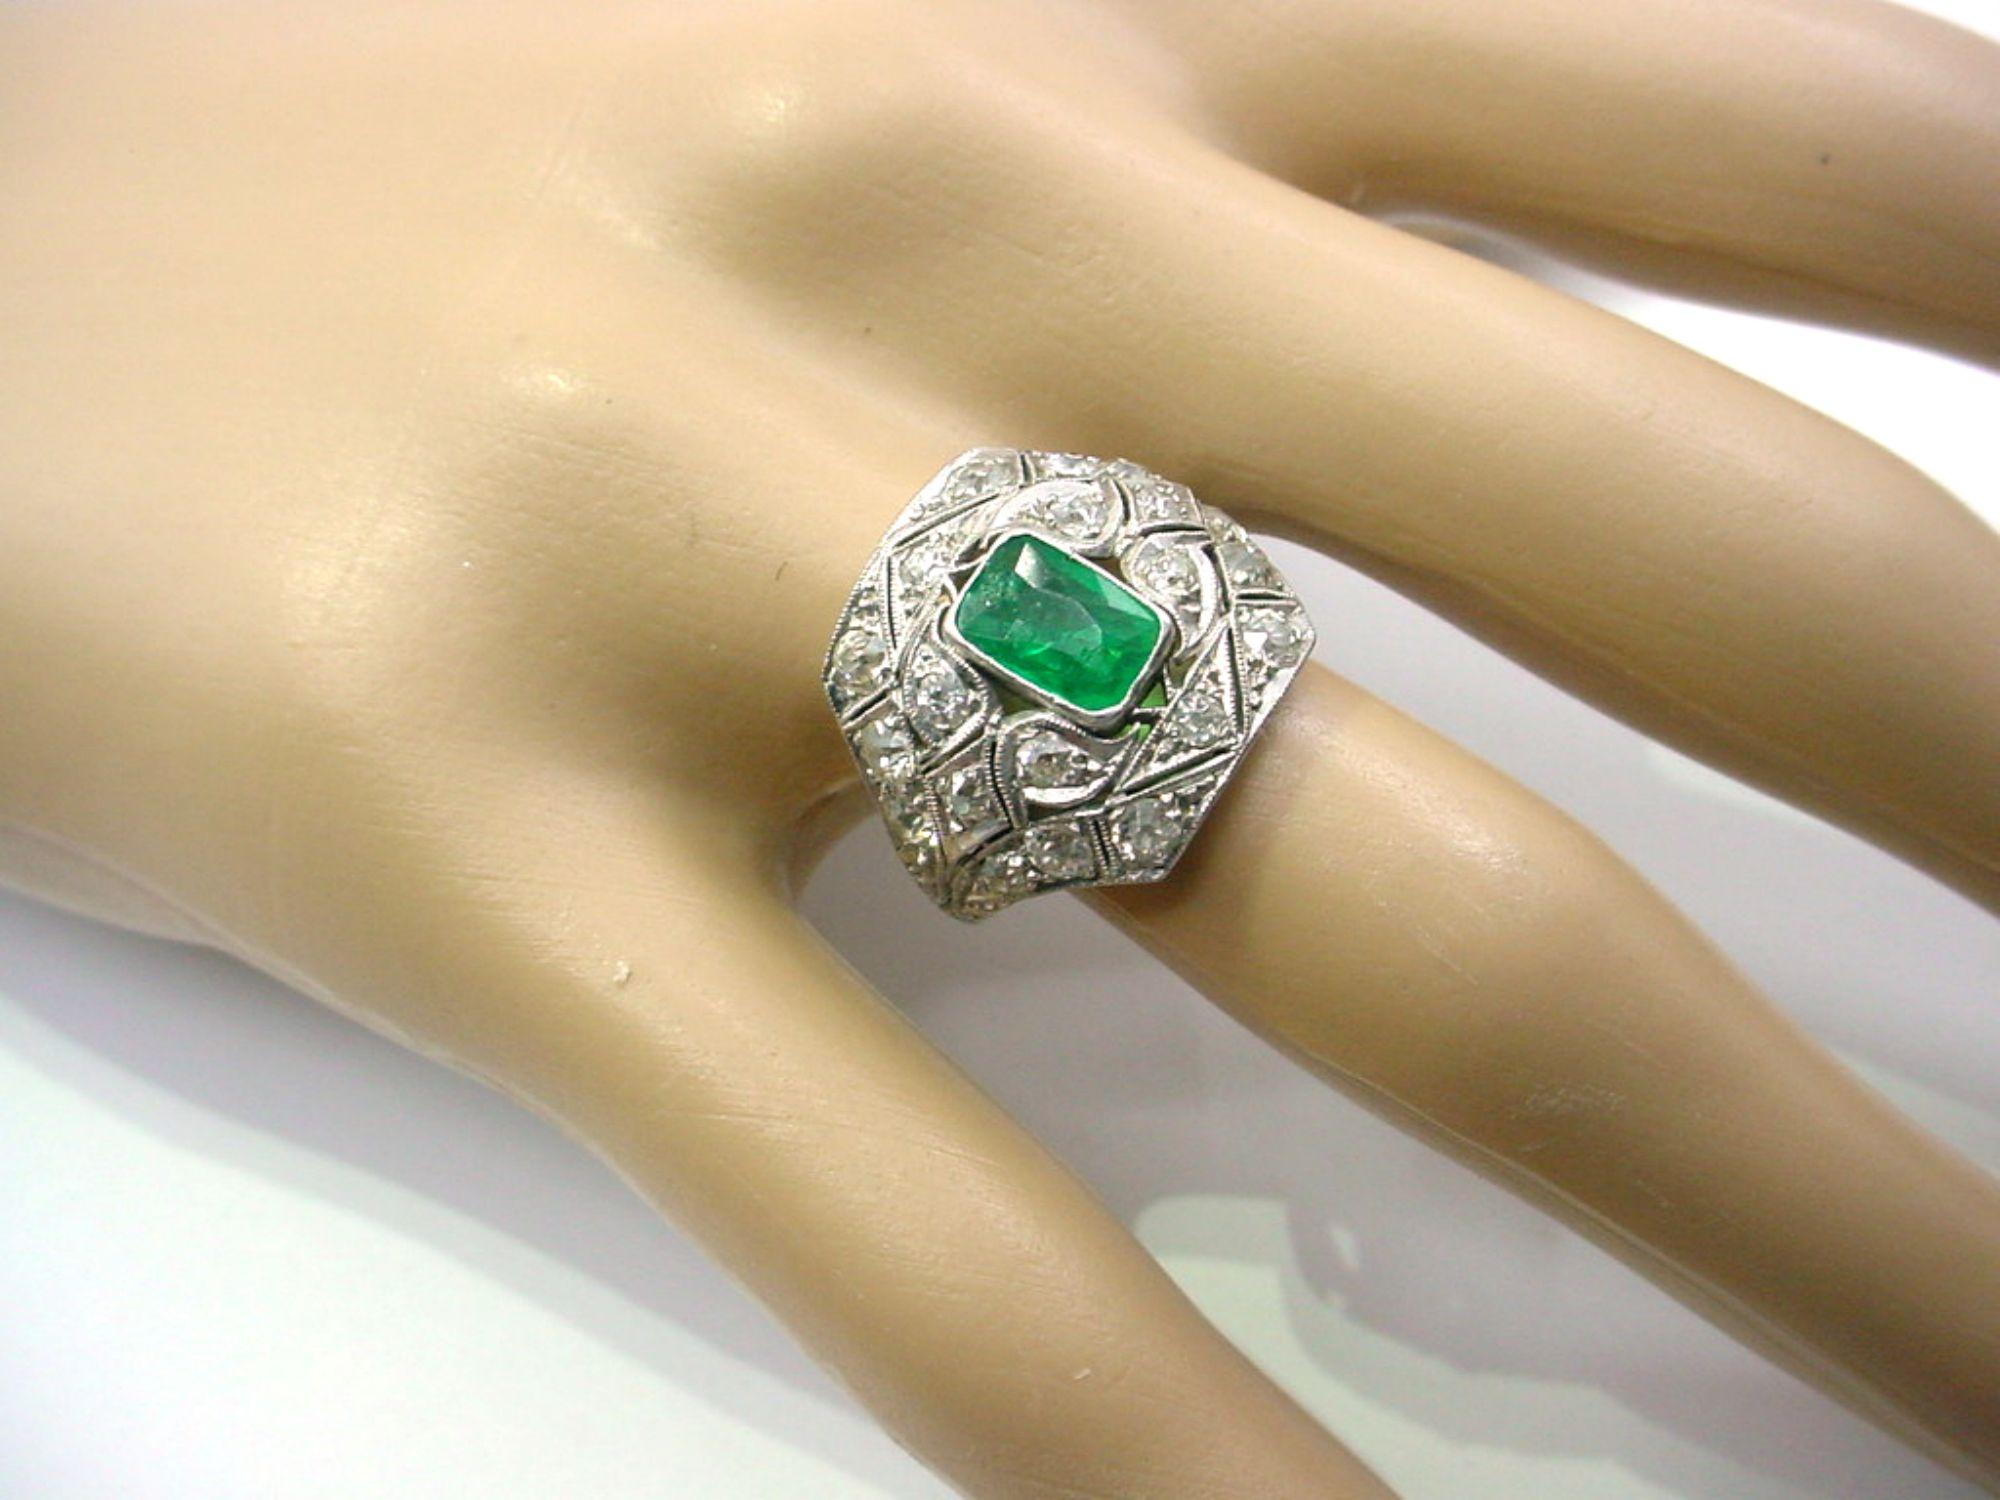 Stunning authentic Art Deco ring rendered n luxurious platinum...    The ornately engraved and openwork mounting, featuring leaves and vines, enhanced with 20 old cut diamonds approx. 1.24 cts.  Ring size 5.5 US and sizeable.  

The central emerald